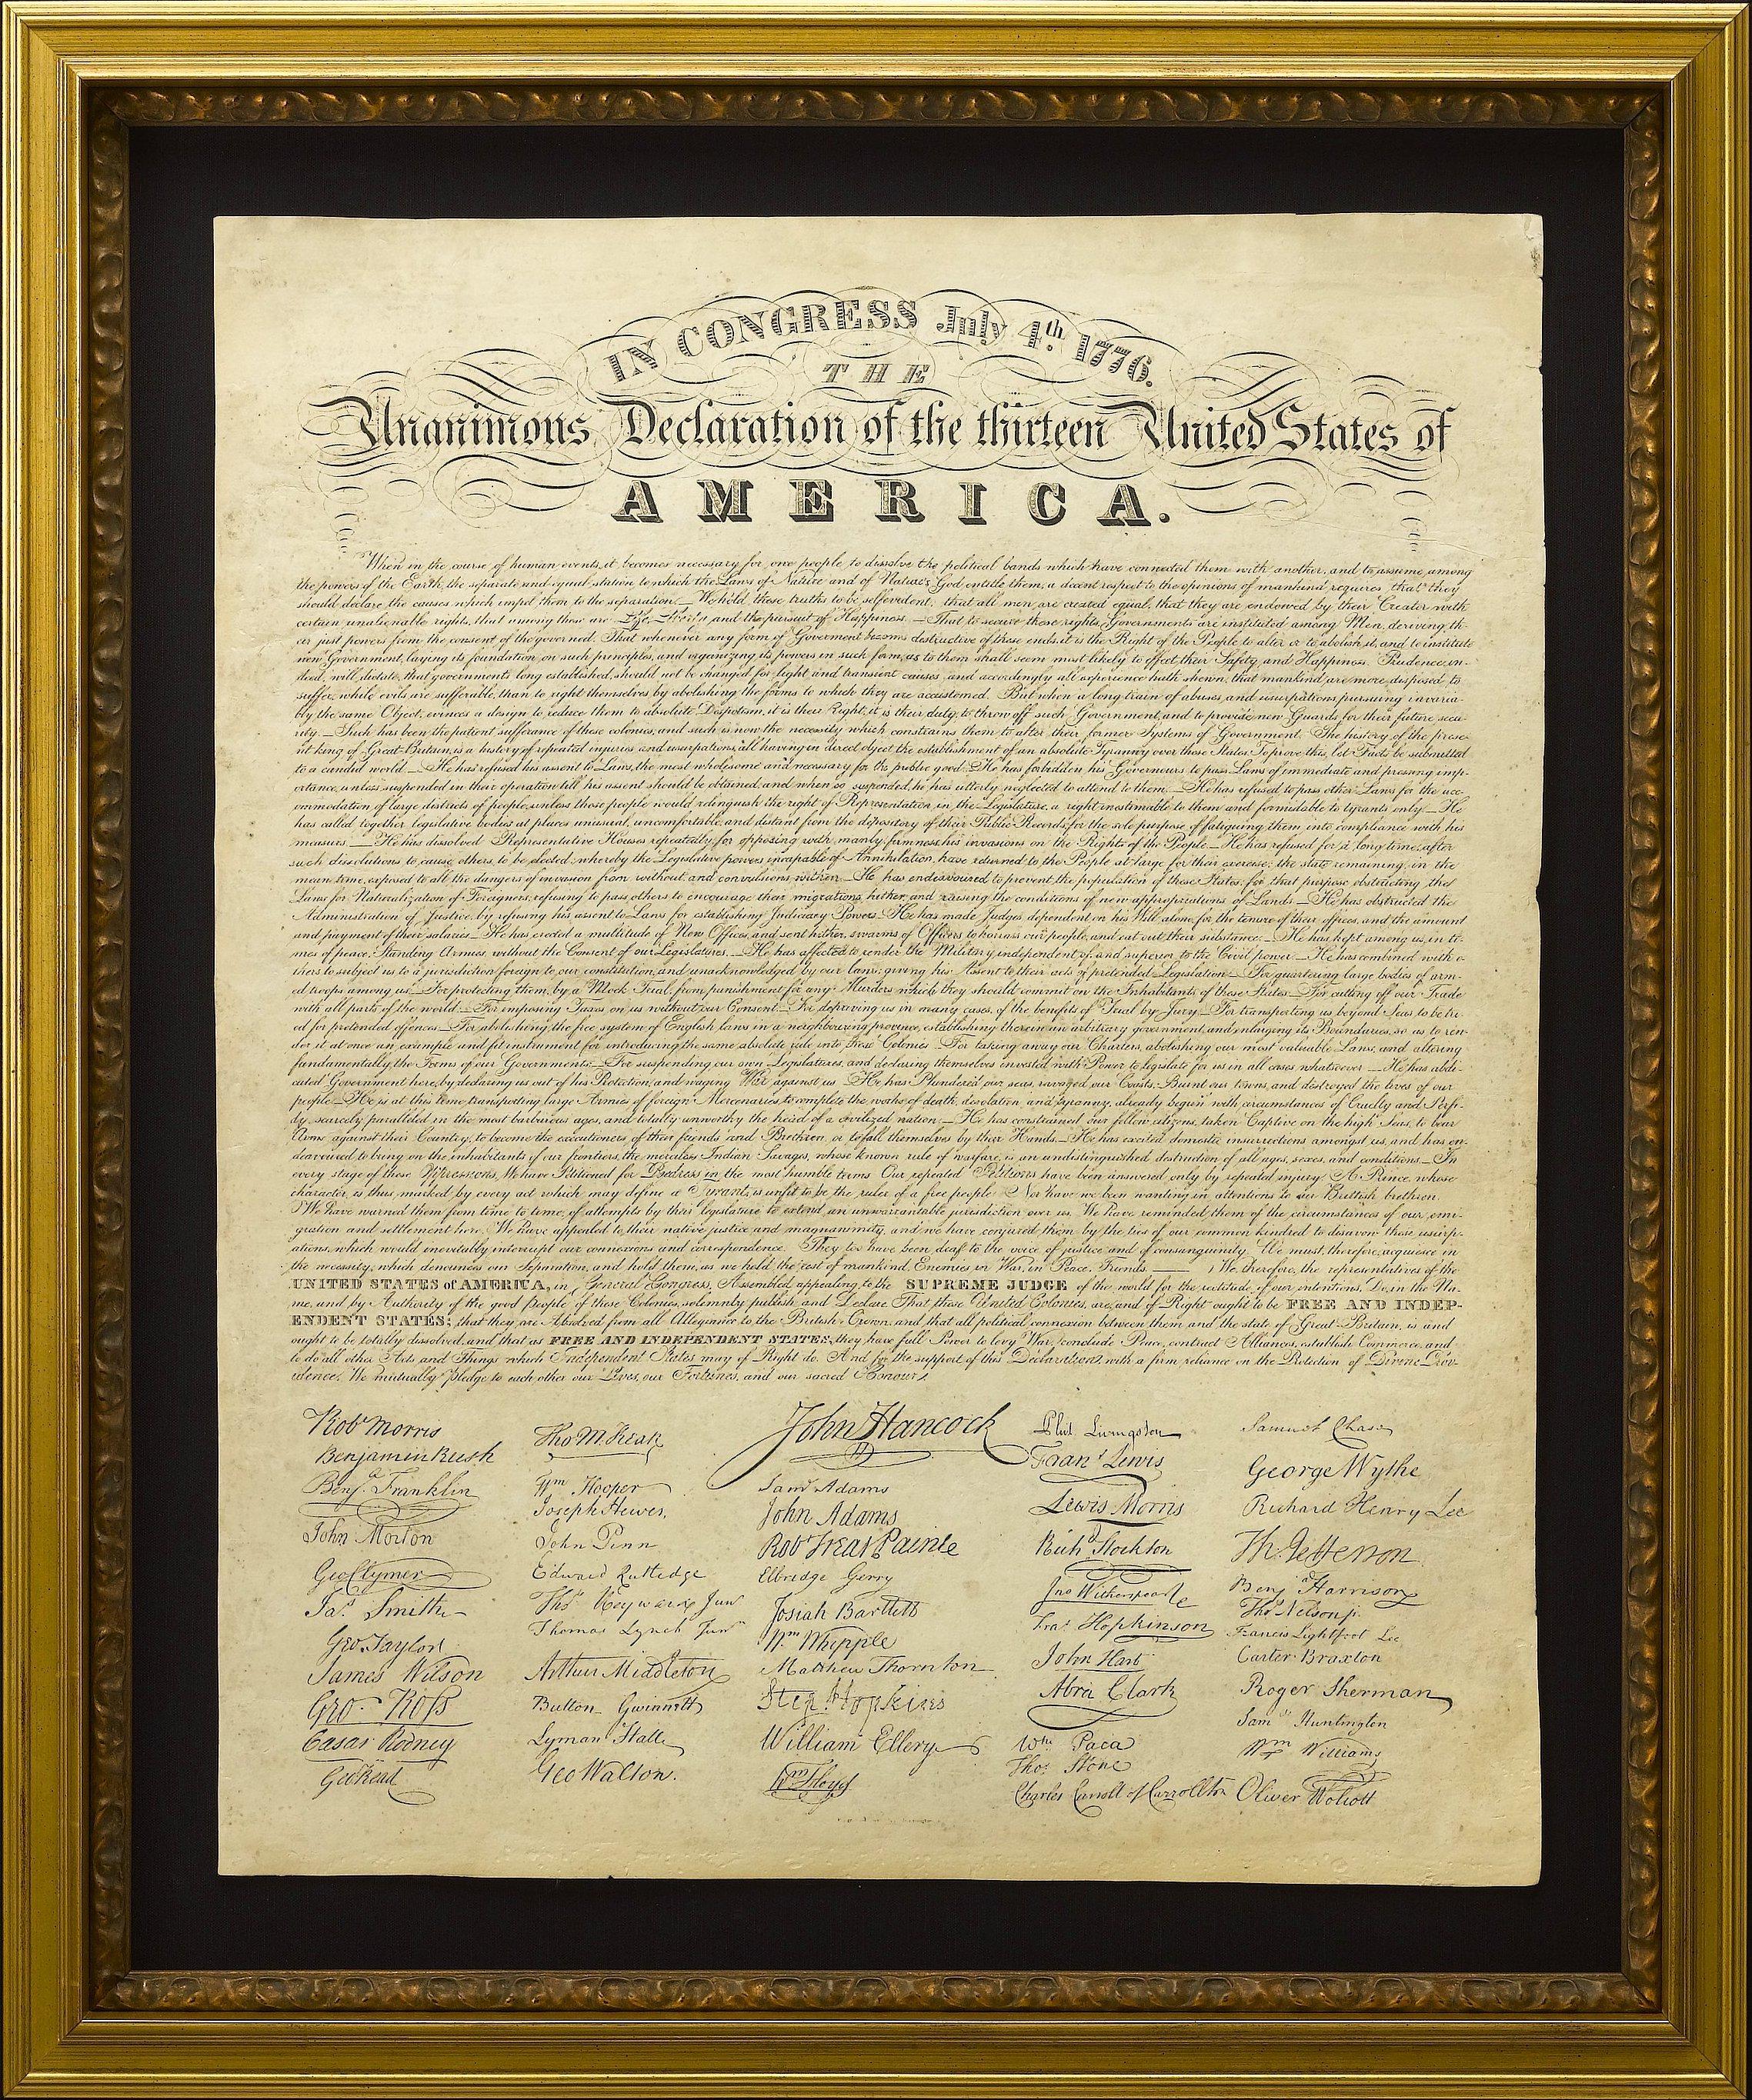 The Declaration of Independence is the foundation document of the United States and has been printed many times since its original publication in 1776. At first as broadsides, then as an essential addition to any volume of laws, it was from the